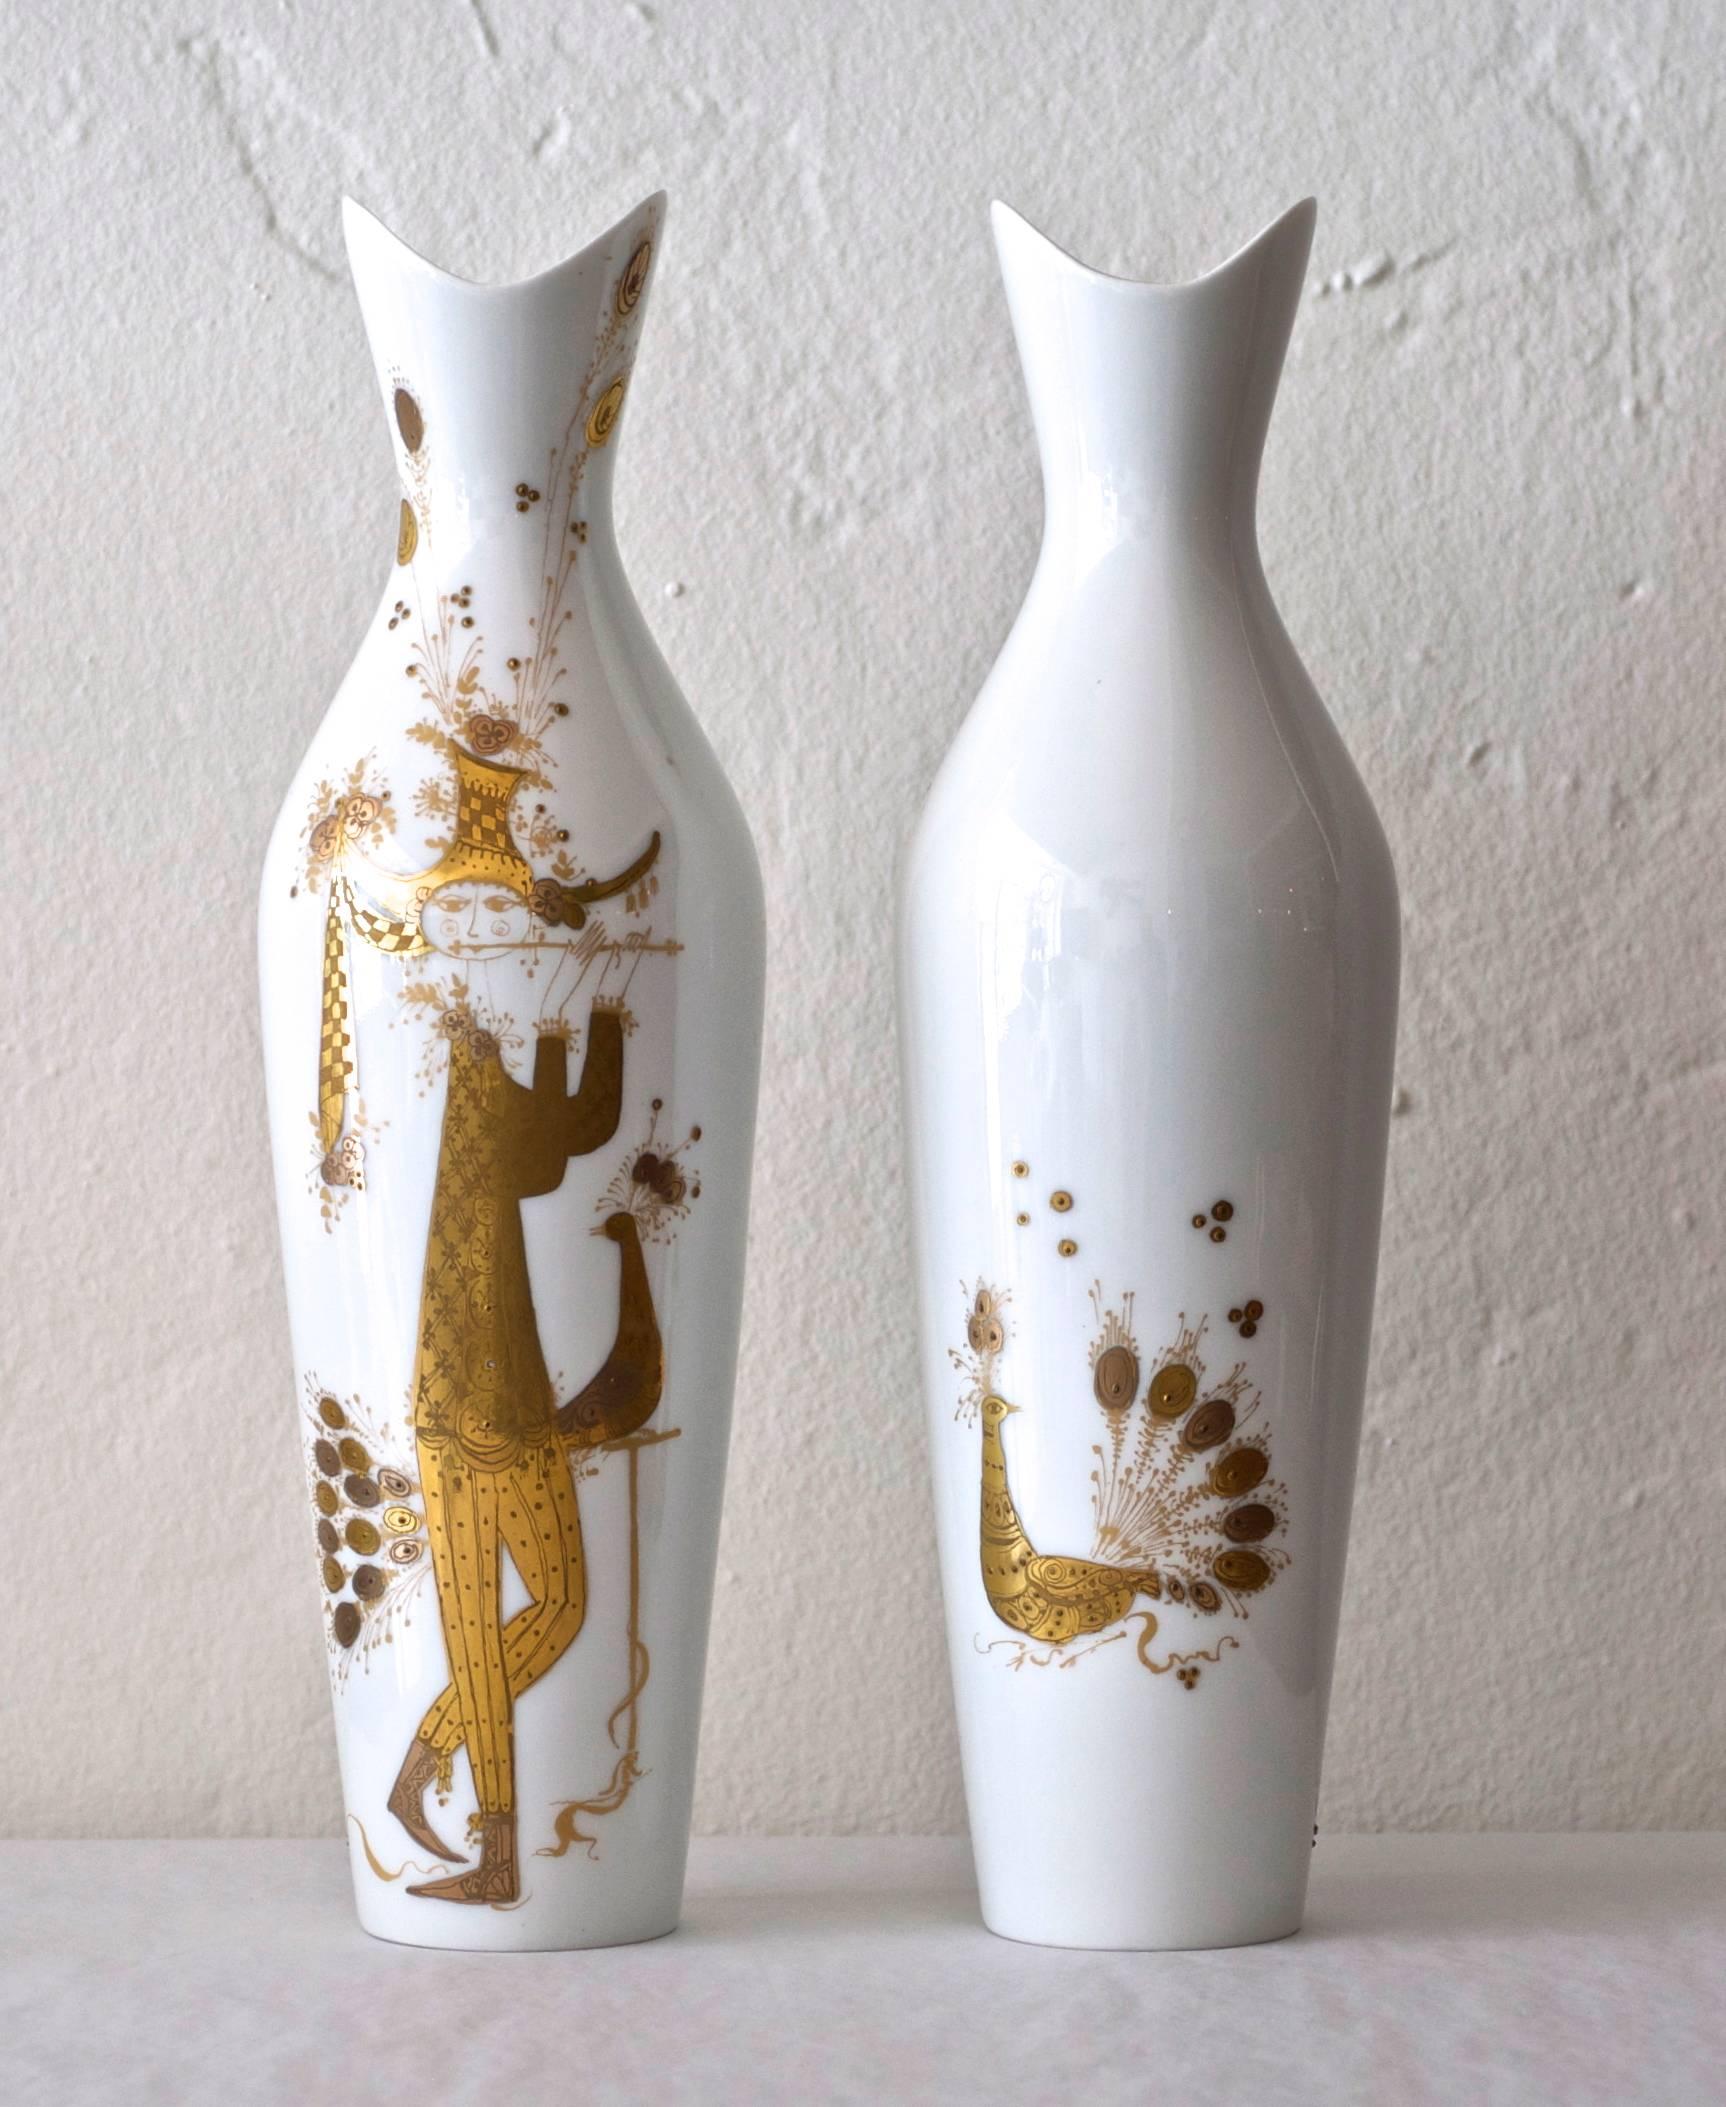 This whimsical pair of porcelain vases are hand-painted with gold. They are in excellent condition.